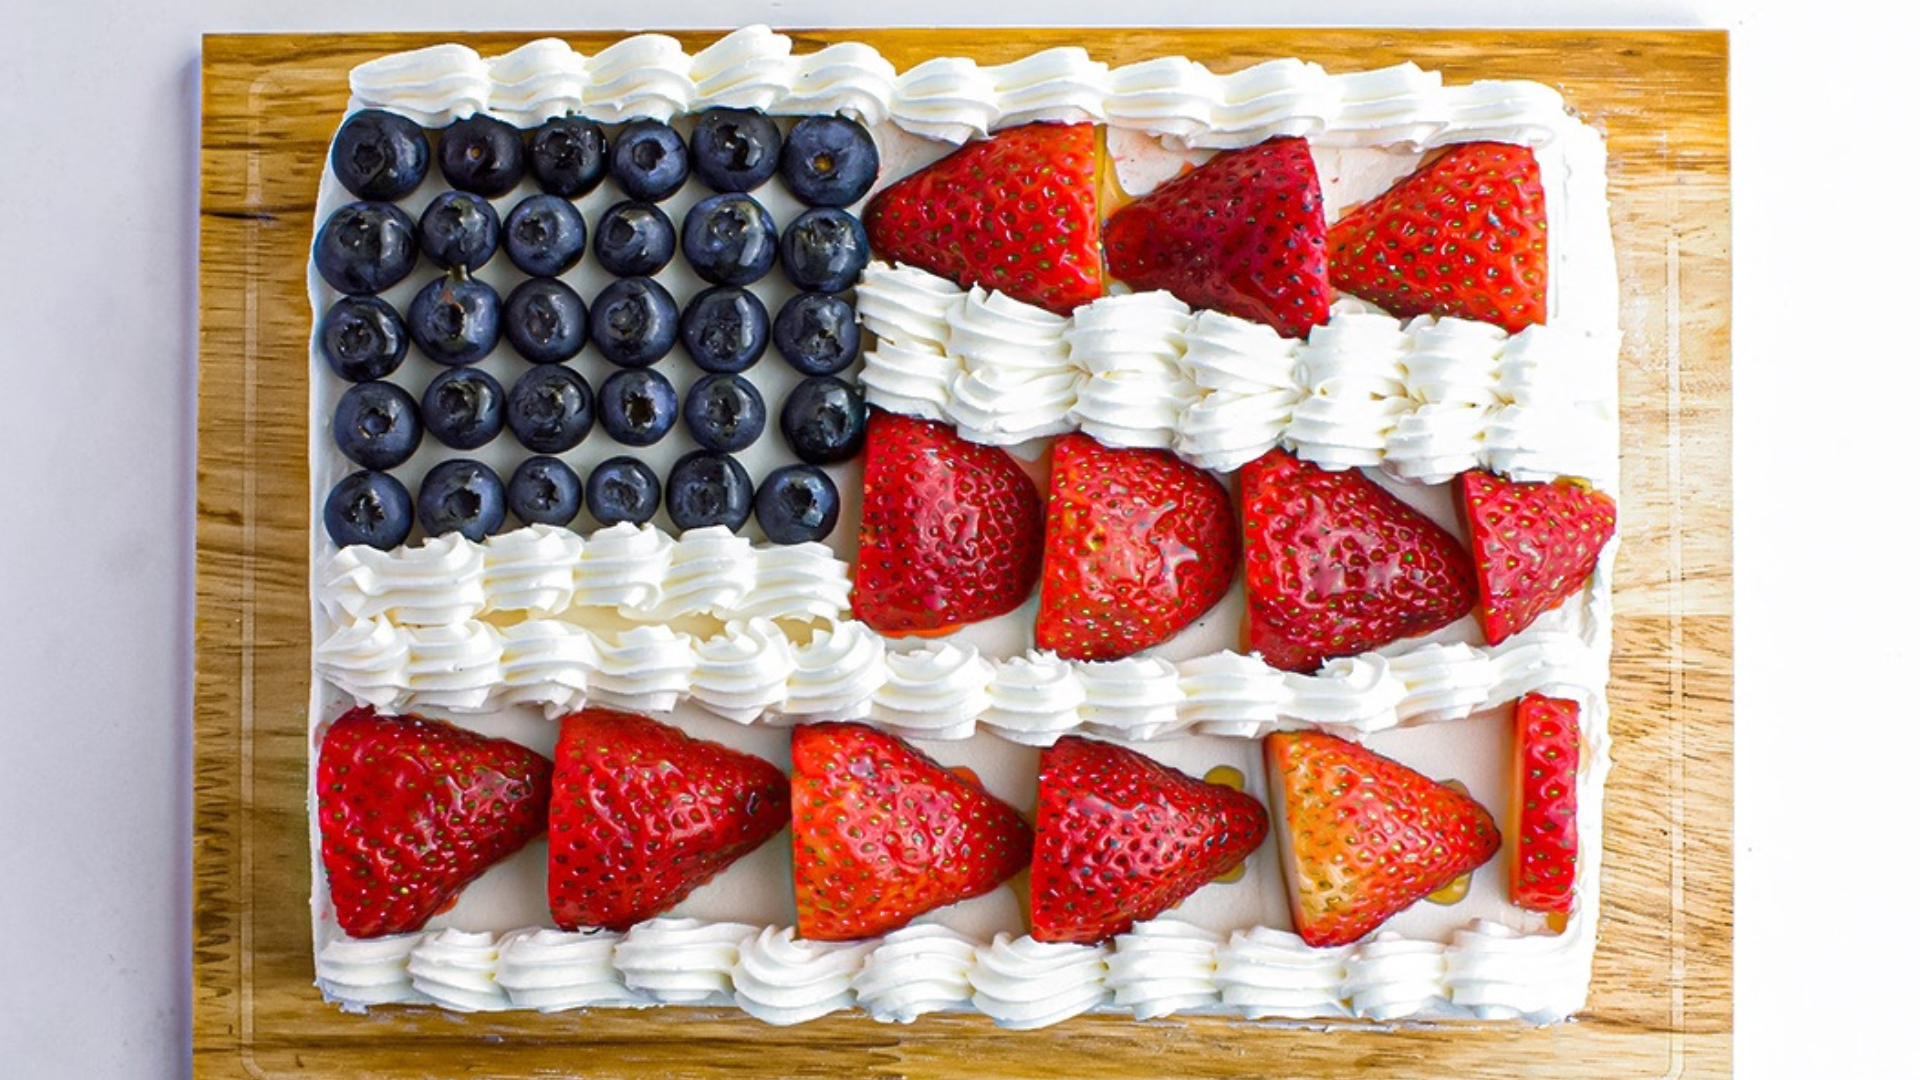 4th of July Flag Cake (Red, White & Blue Cake)